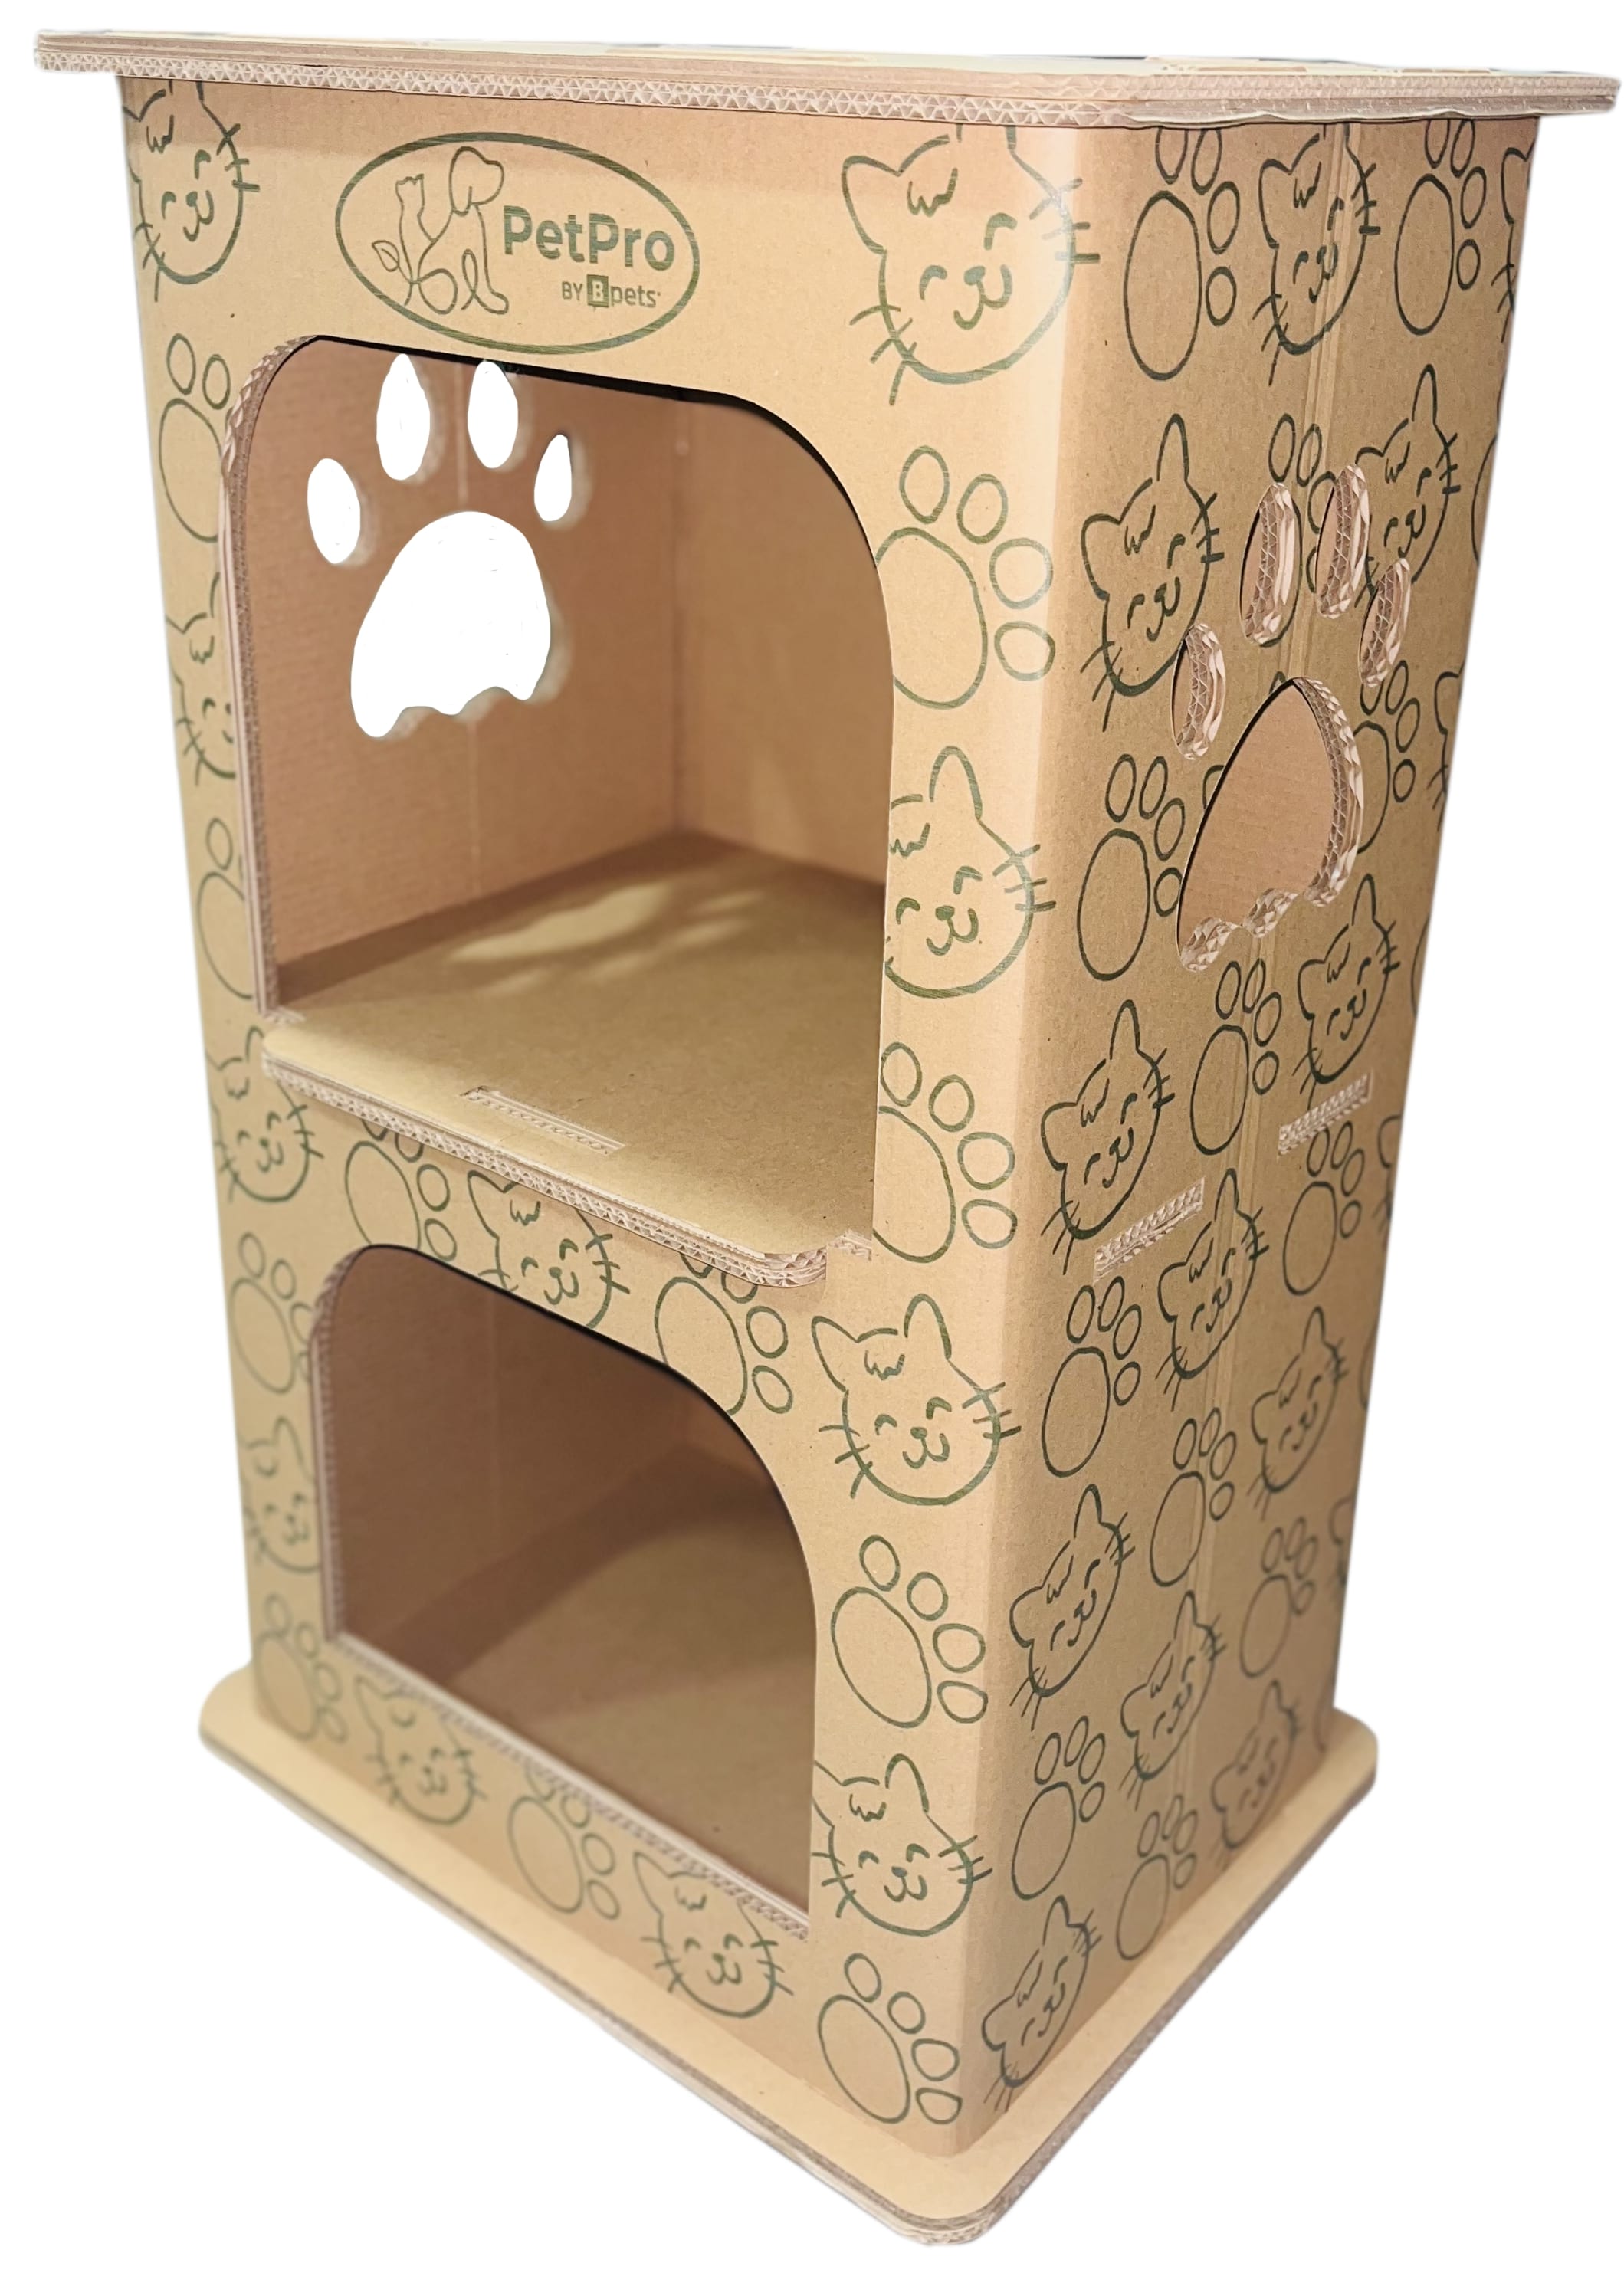 B-pet Multipurpose 2-Floor Pet House, Cat House, Small Animal Hideaway, Eco-Friendly Play House, Corrugated Cardboard Cat Condo, Rabbit Hutch Alternative, Easy Assembly, Durable & Spacious